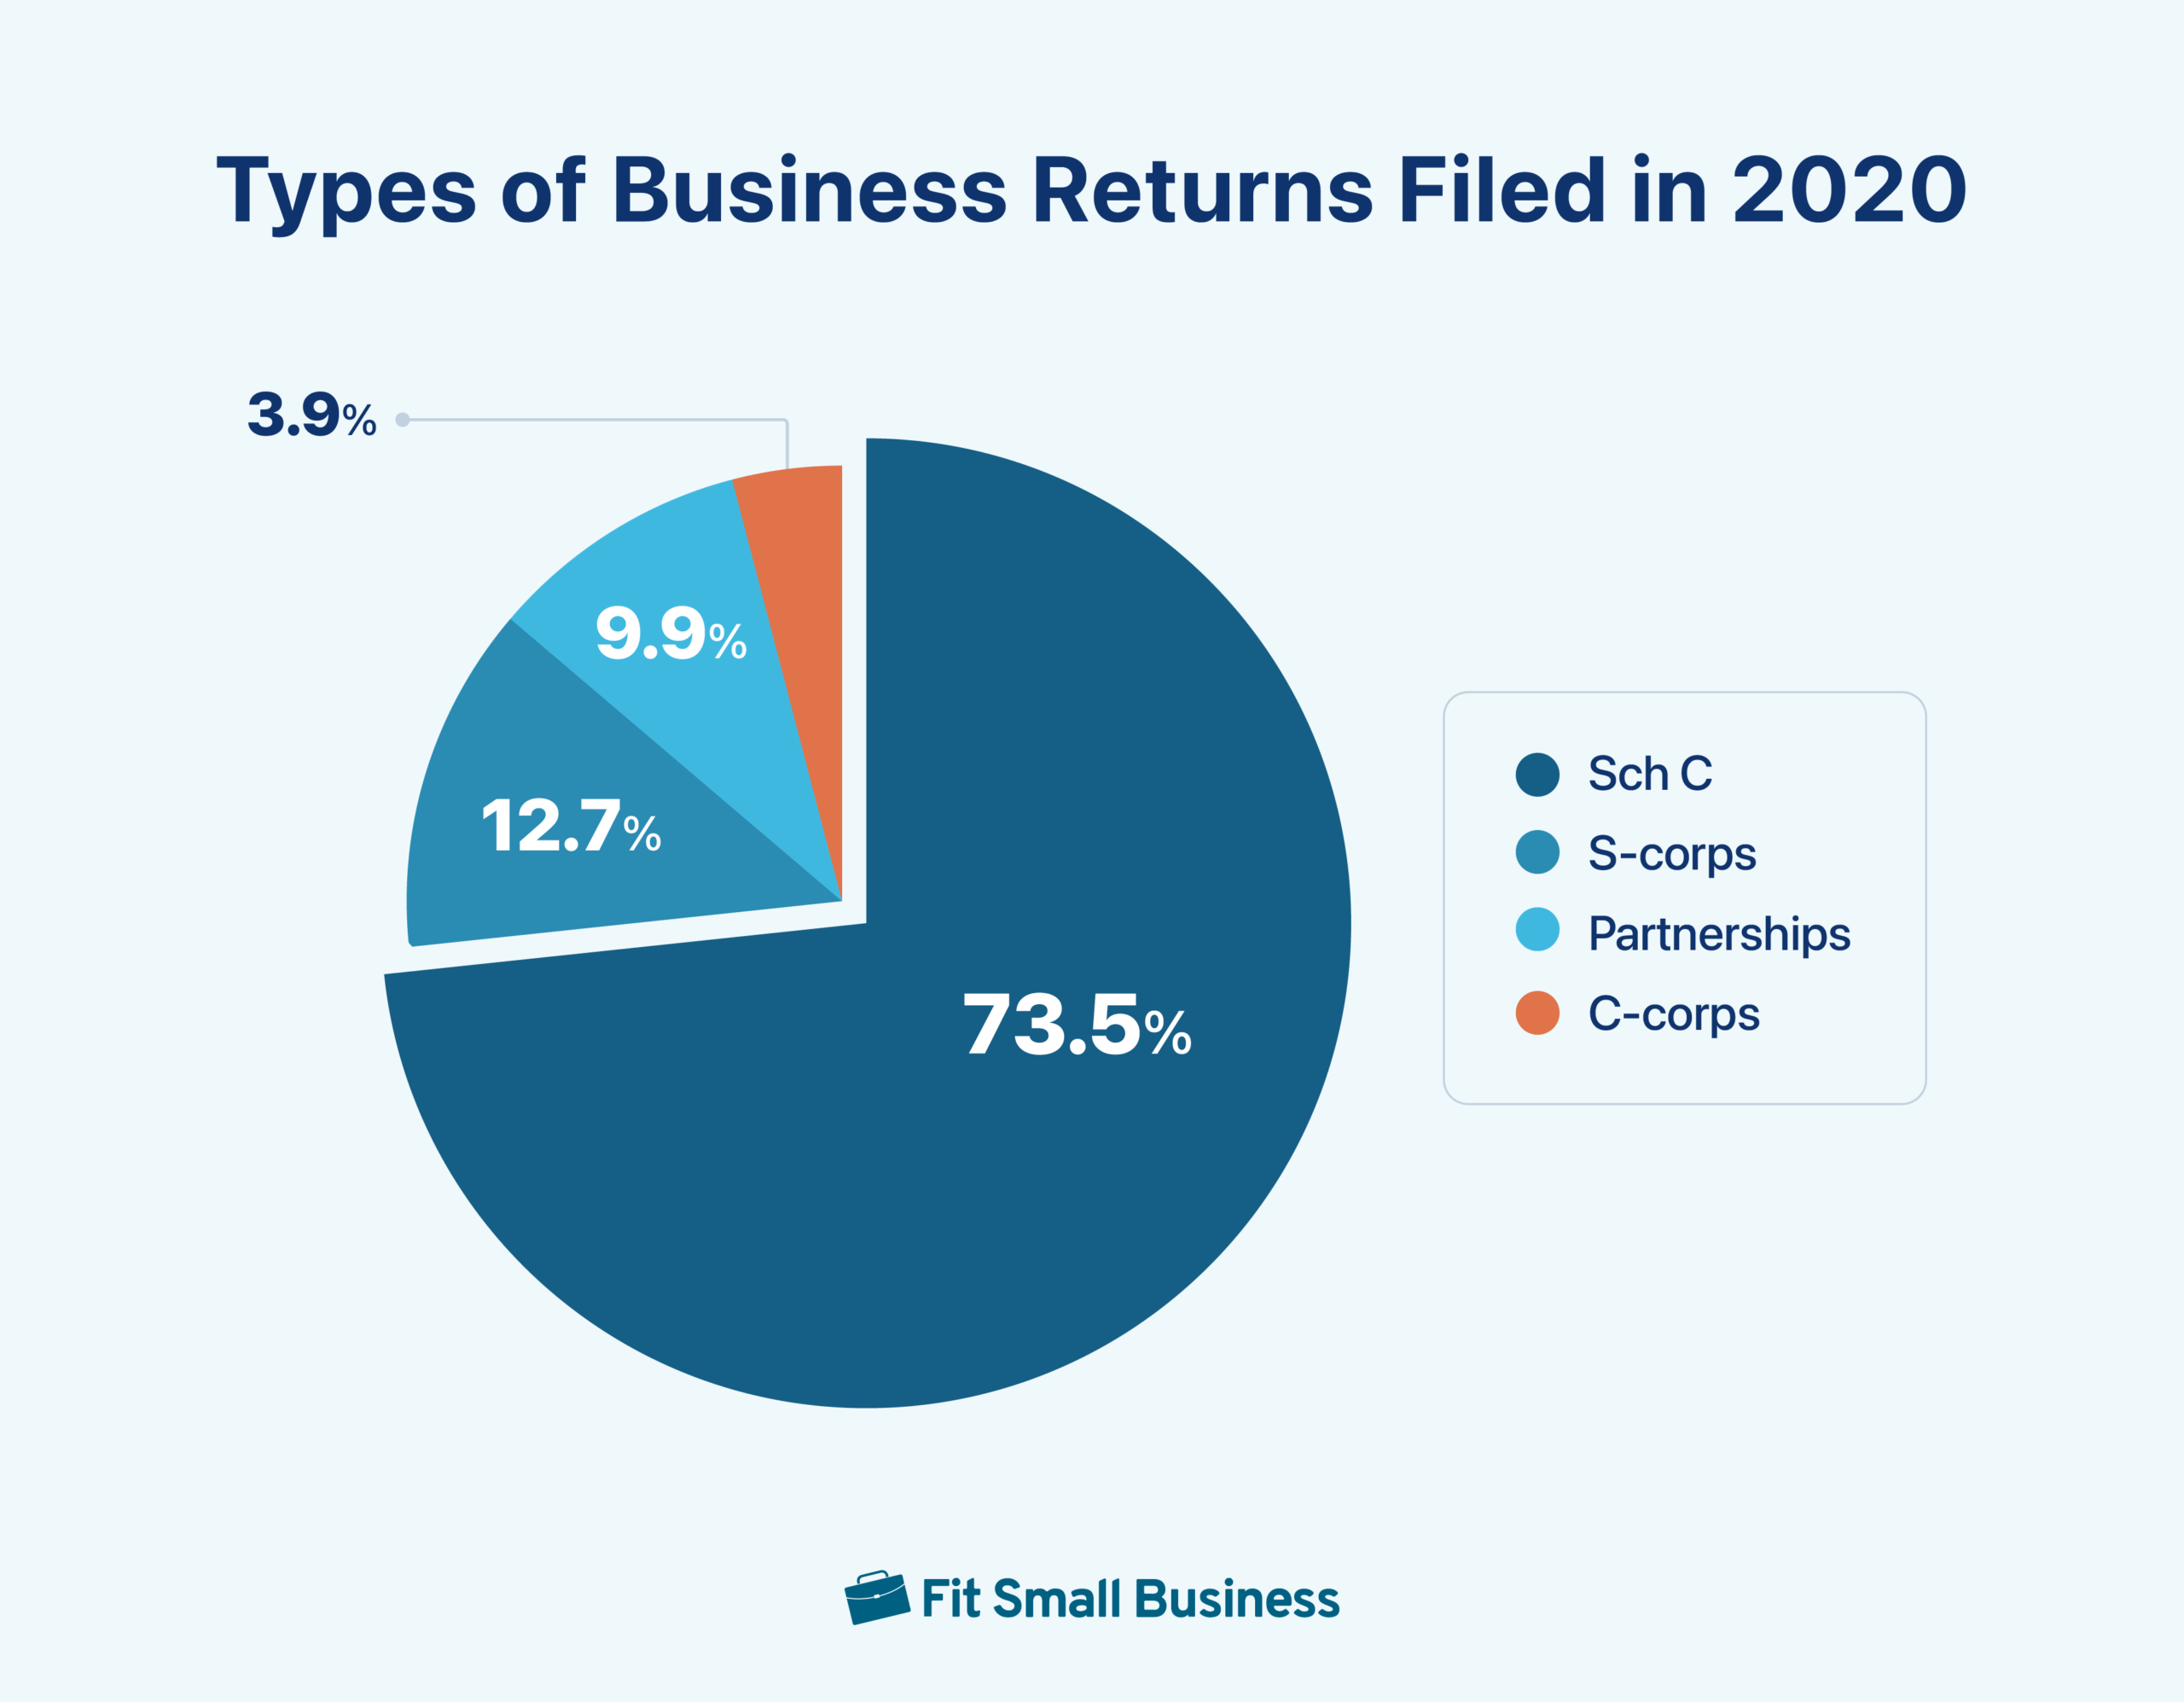 A pie chart visualizing the types of business returns filed in 2020.